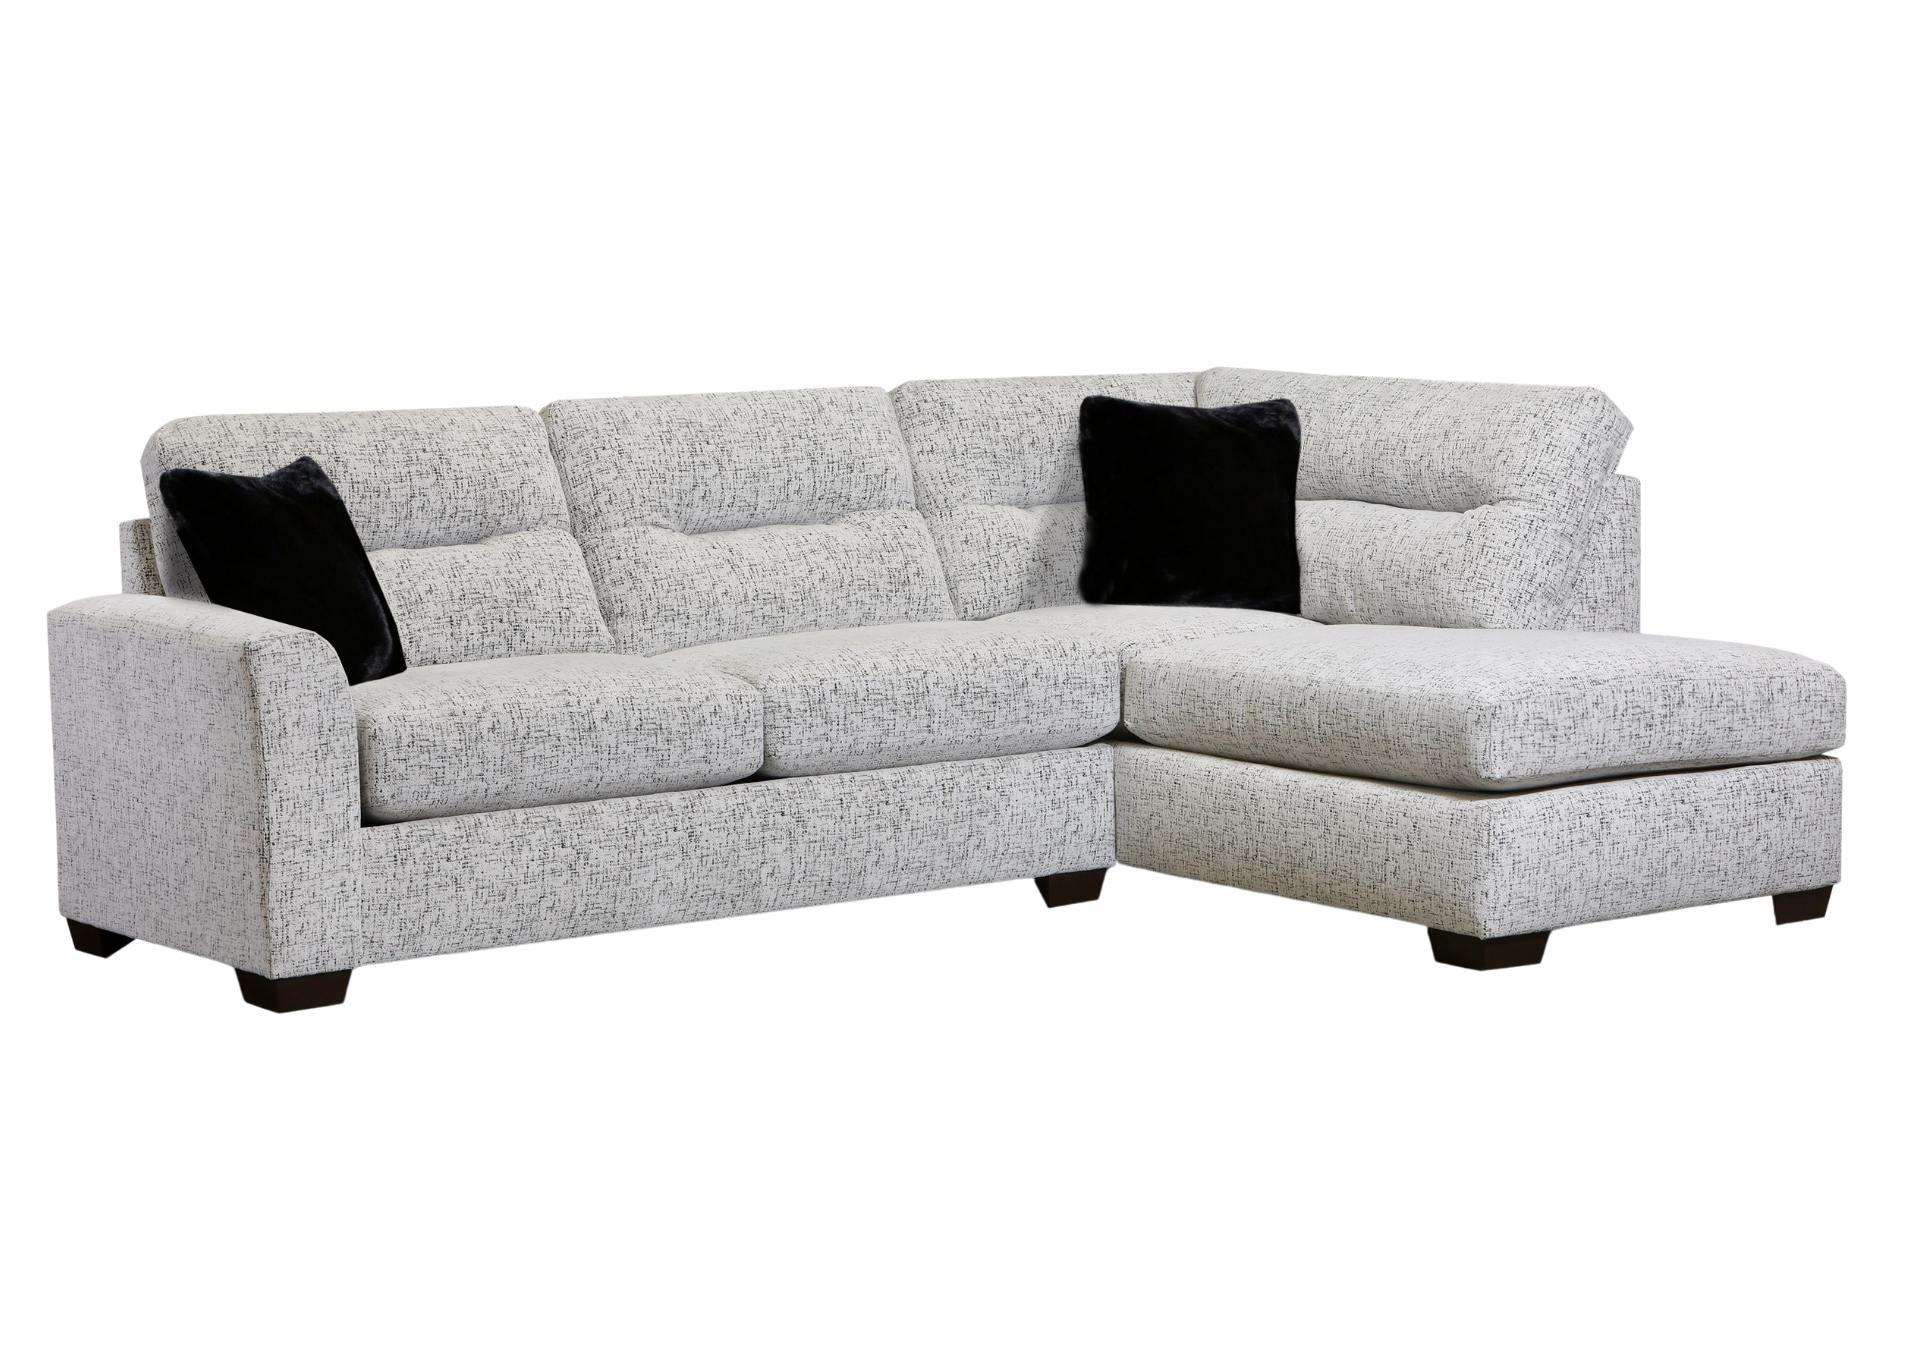 VICTORIE 2 PIECE SECTIONAL,PEAL